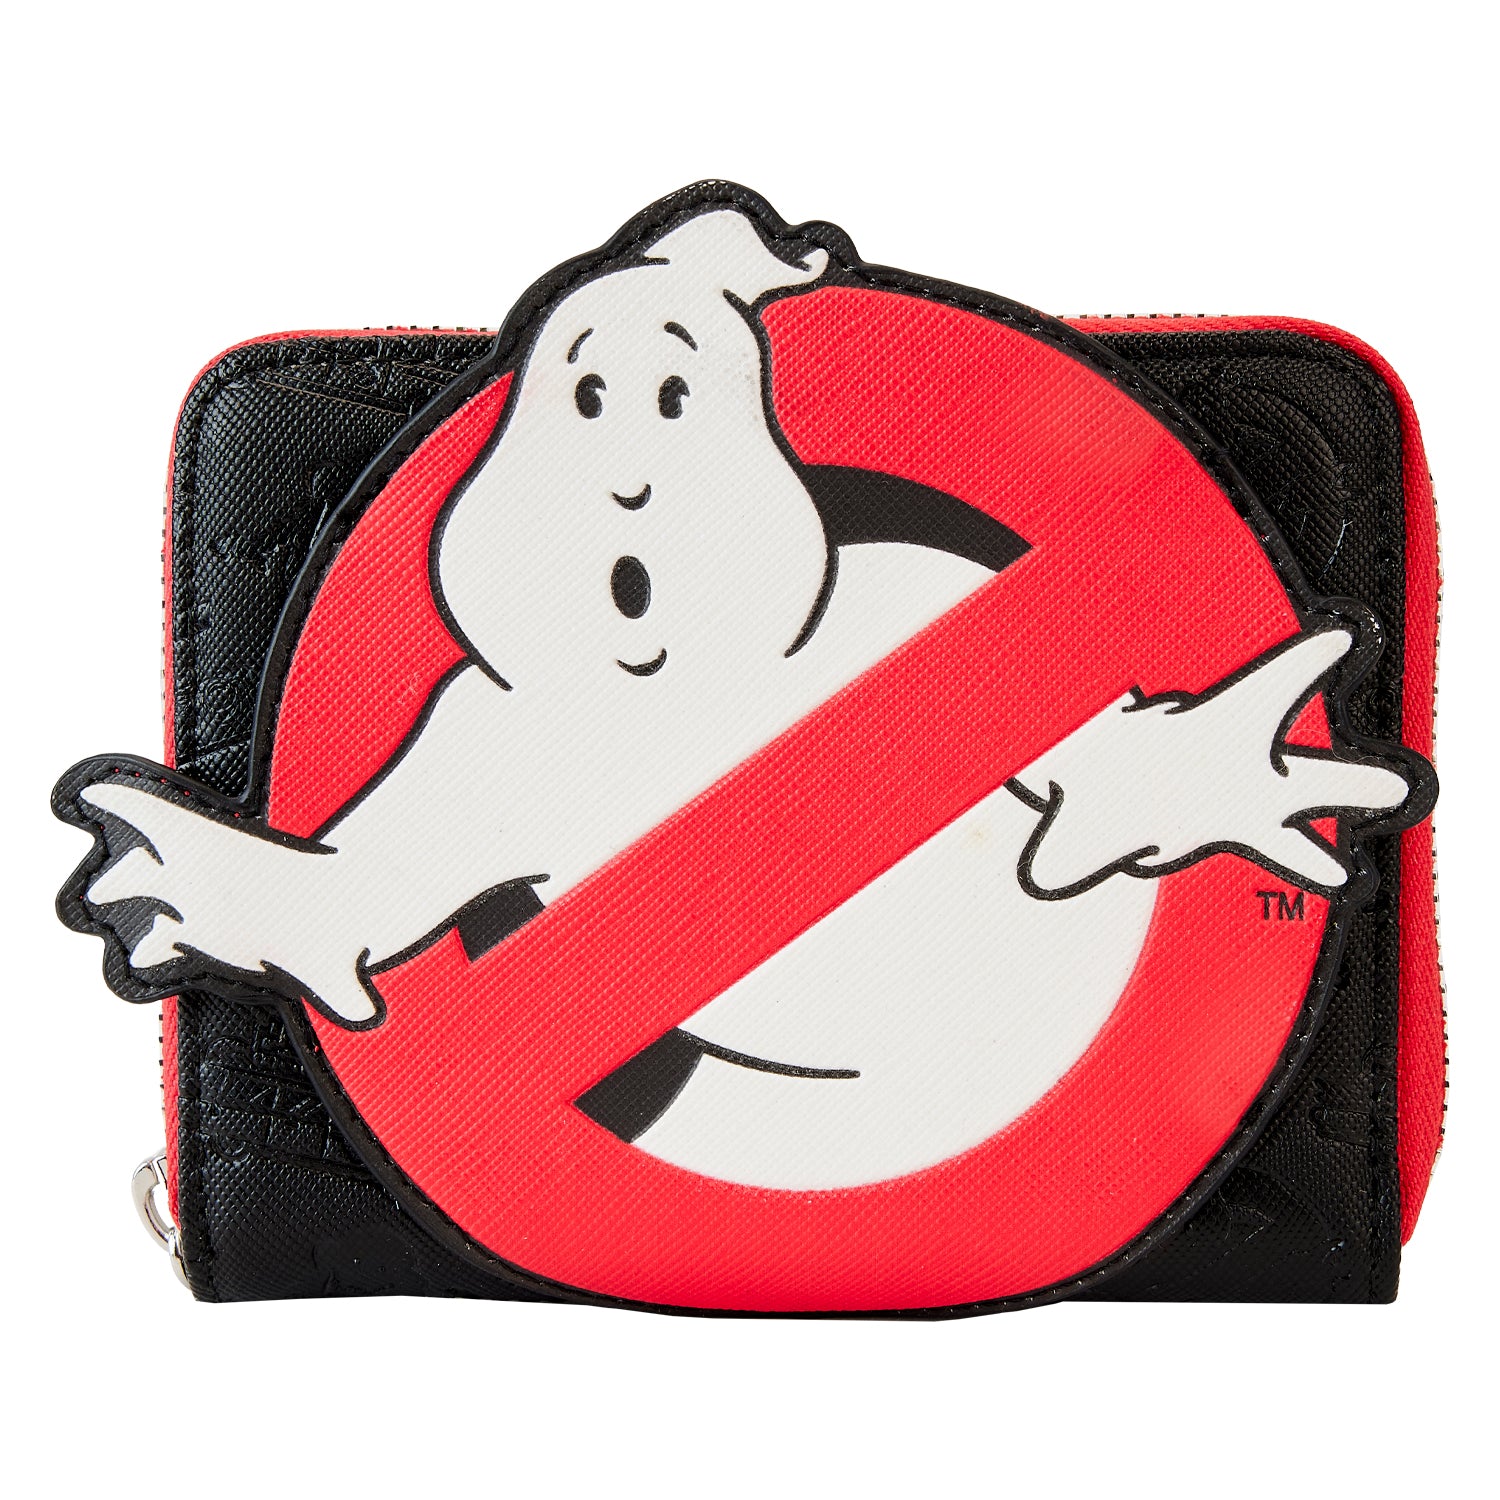 ghostbusters ghost logo